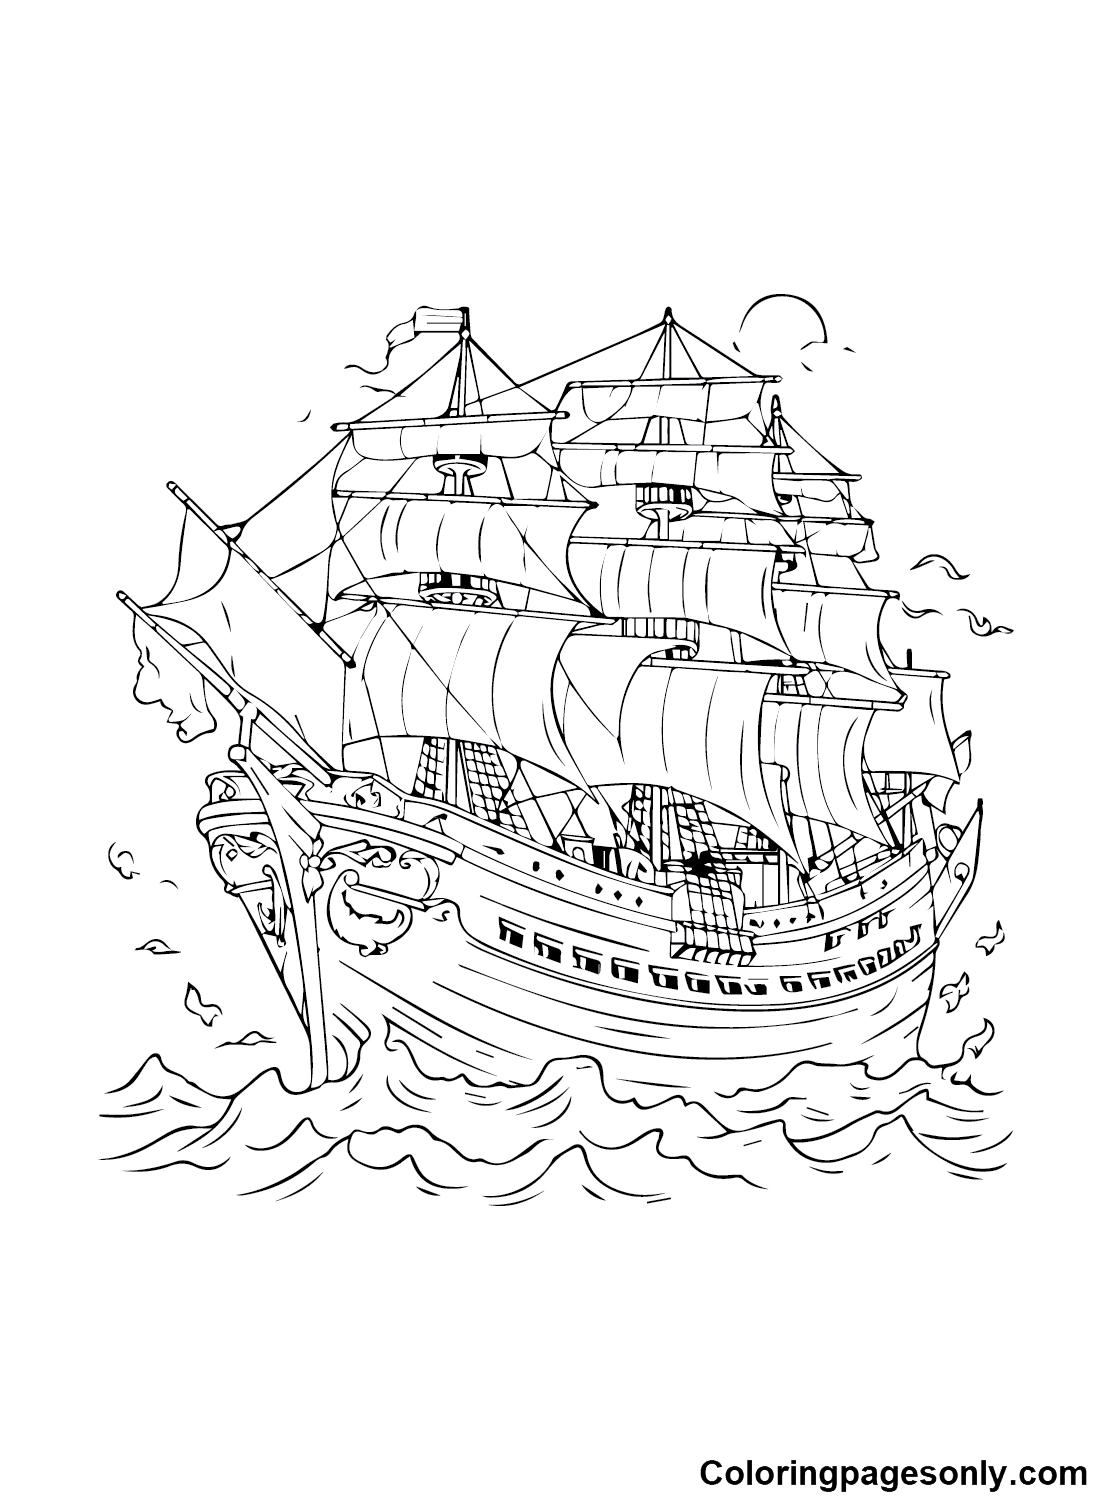 Ship coloring pages printable for free download